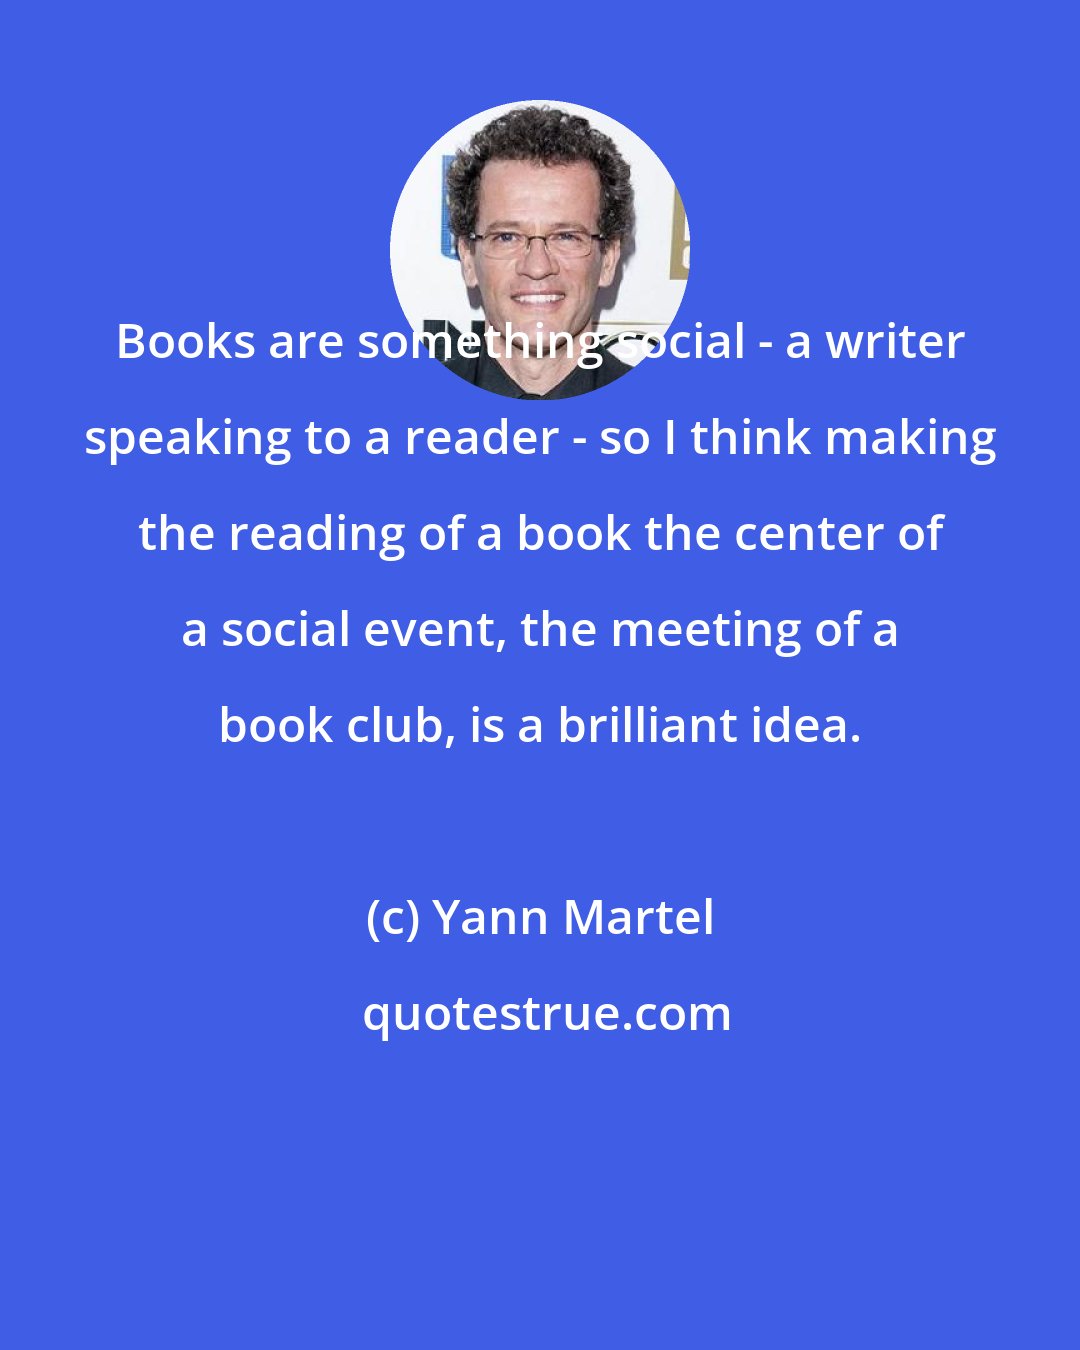 Yann Martel: Books are something social - a writer speaking to a reader - so I think making the reading of a book the center of a social event, the meeting of a book club, is a brilliant idea.